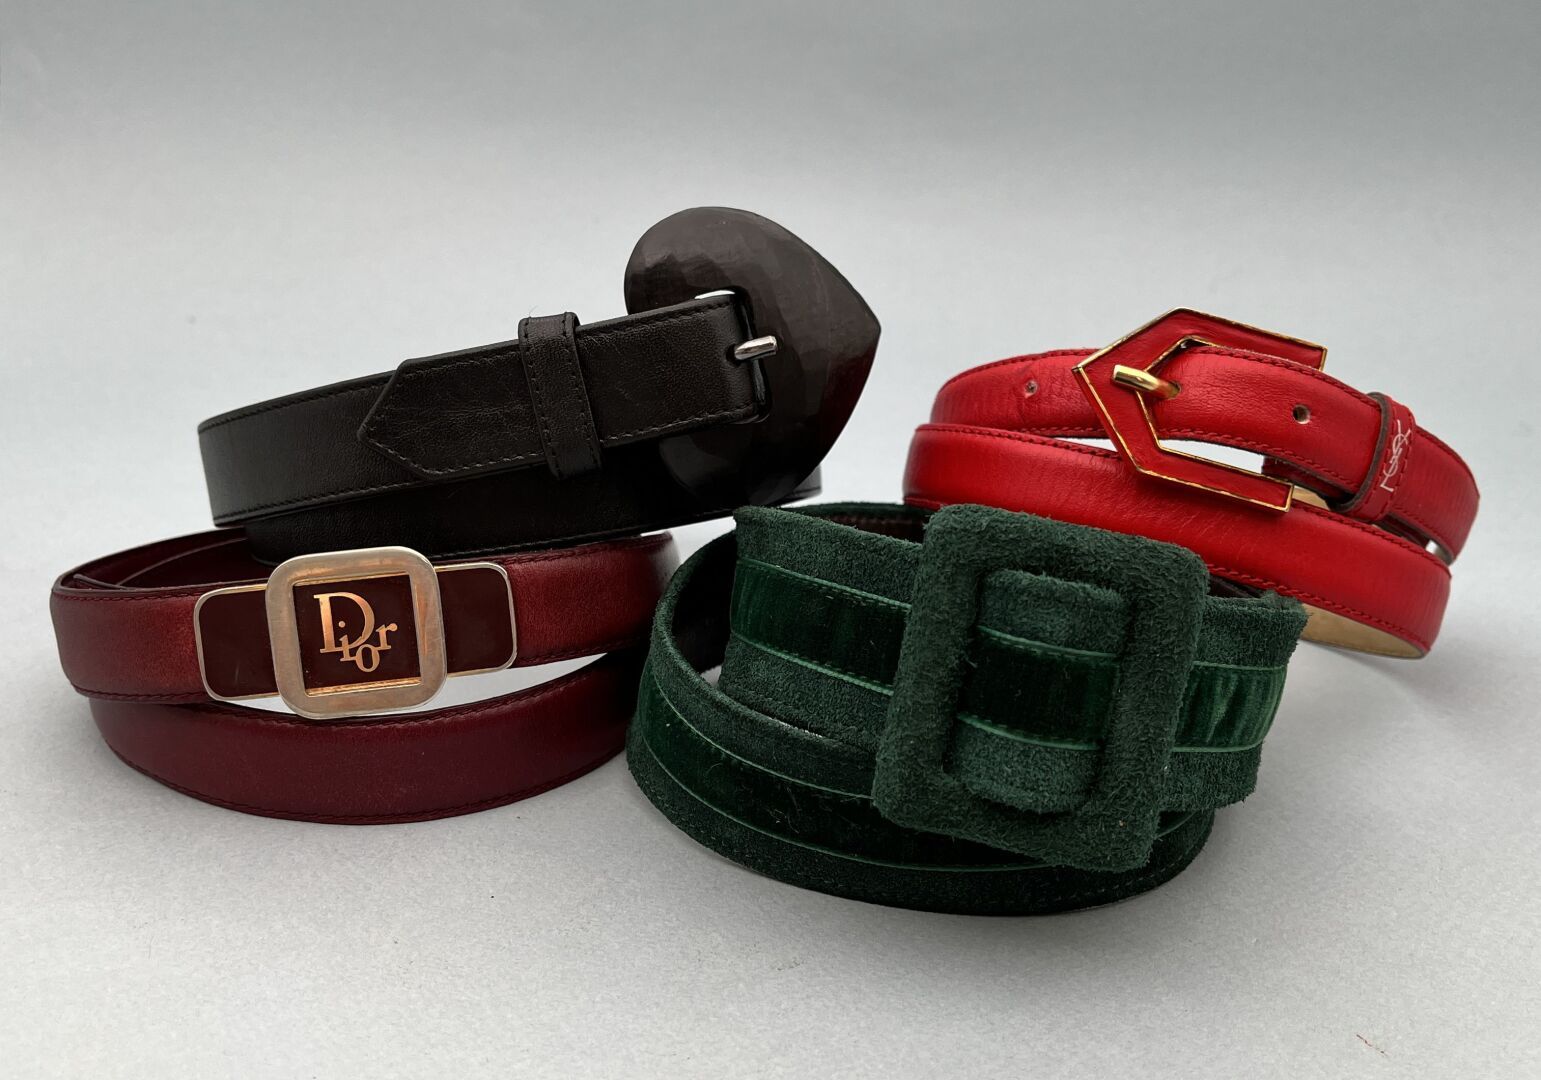 Null YVES SAINT LAURENT - Paris
Three leather and velvet belts
A Dior belt is at&hellip;